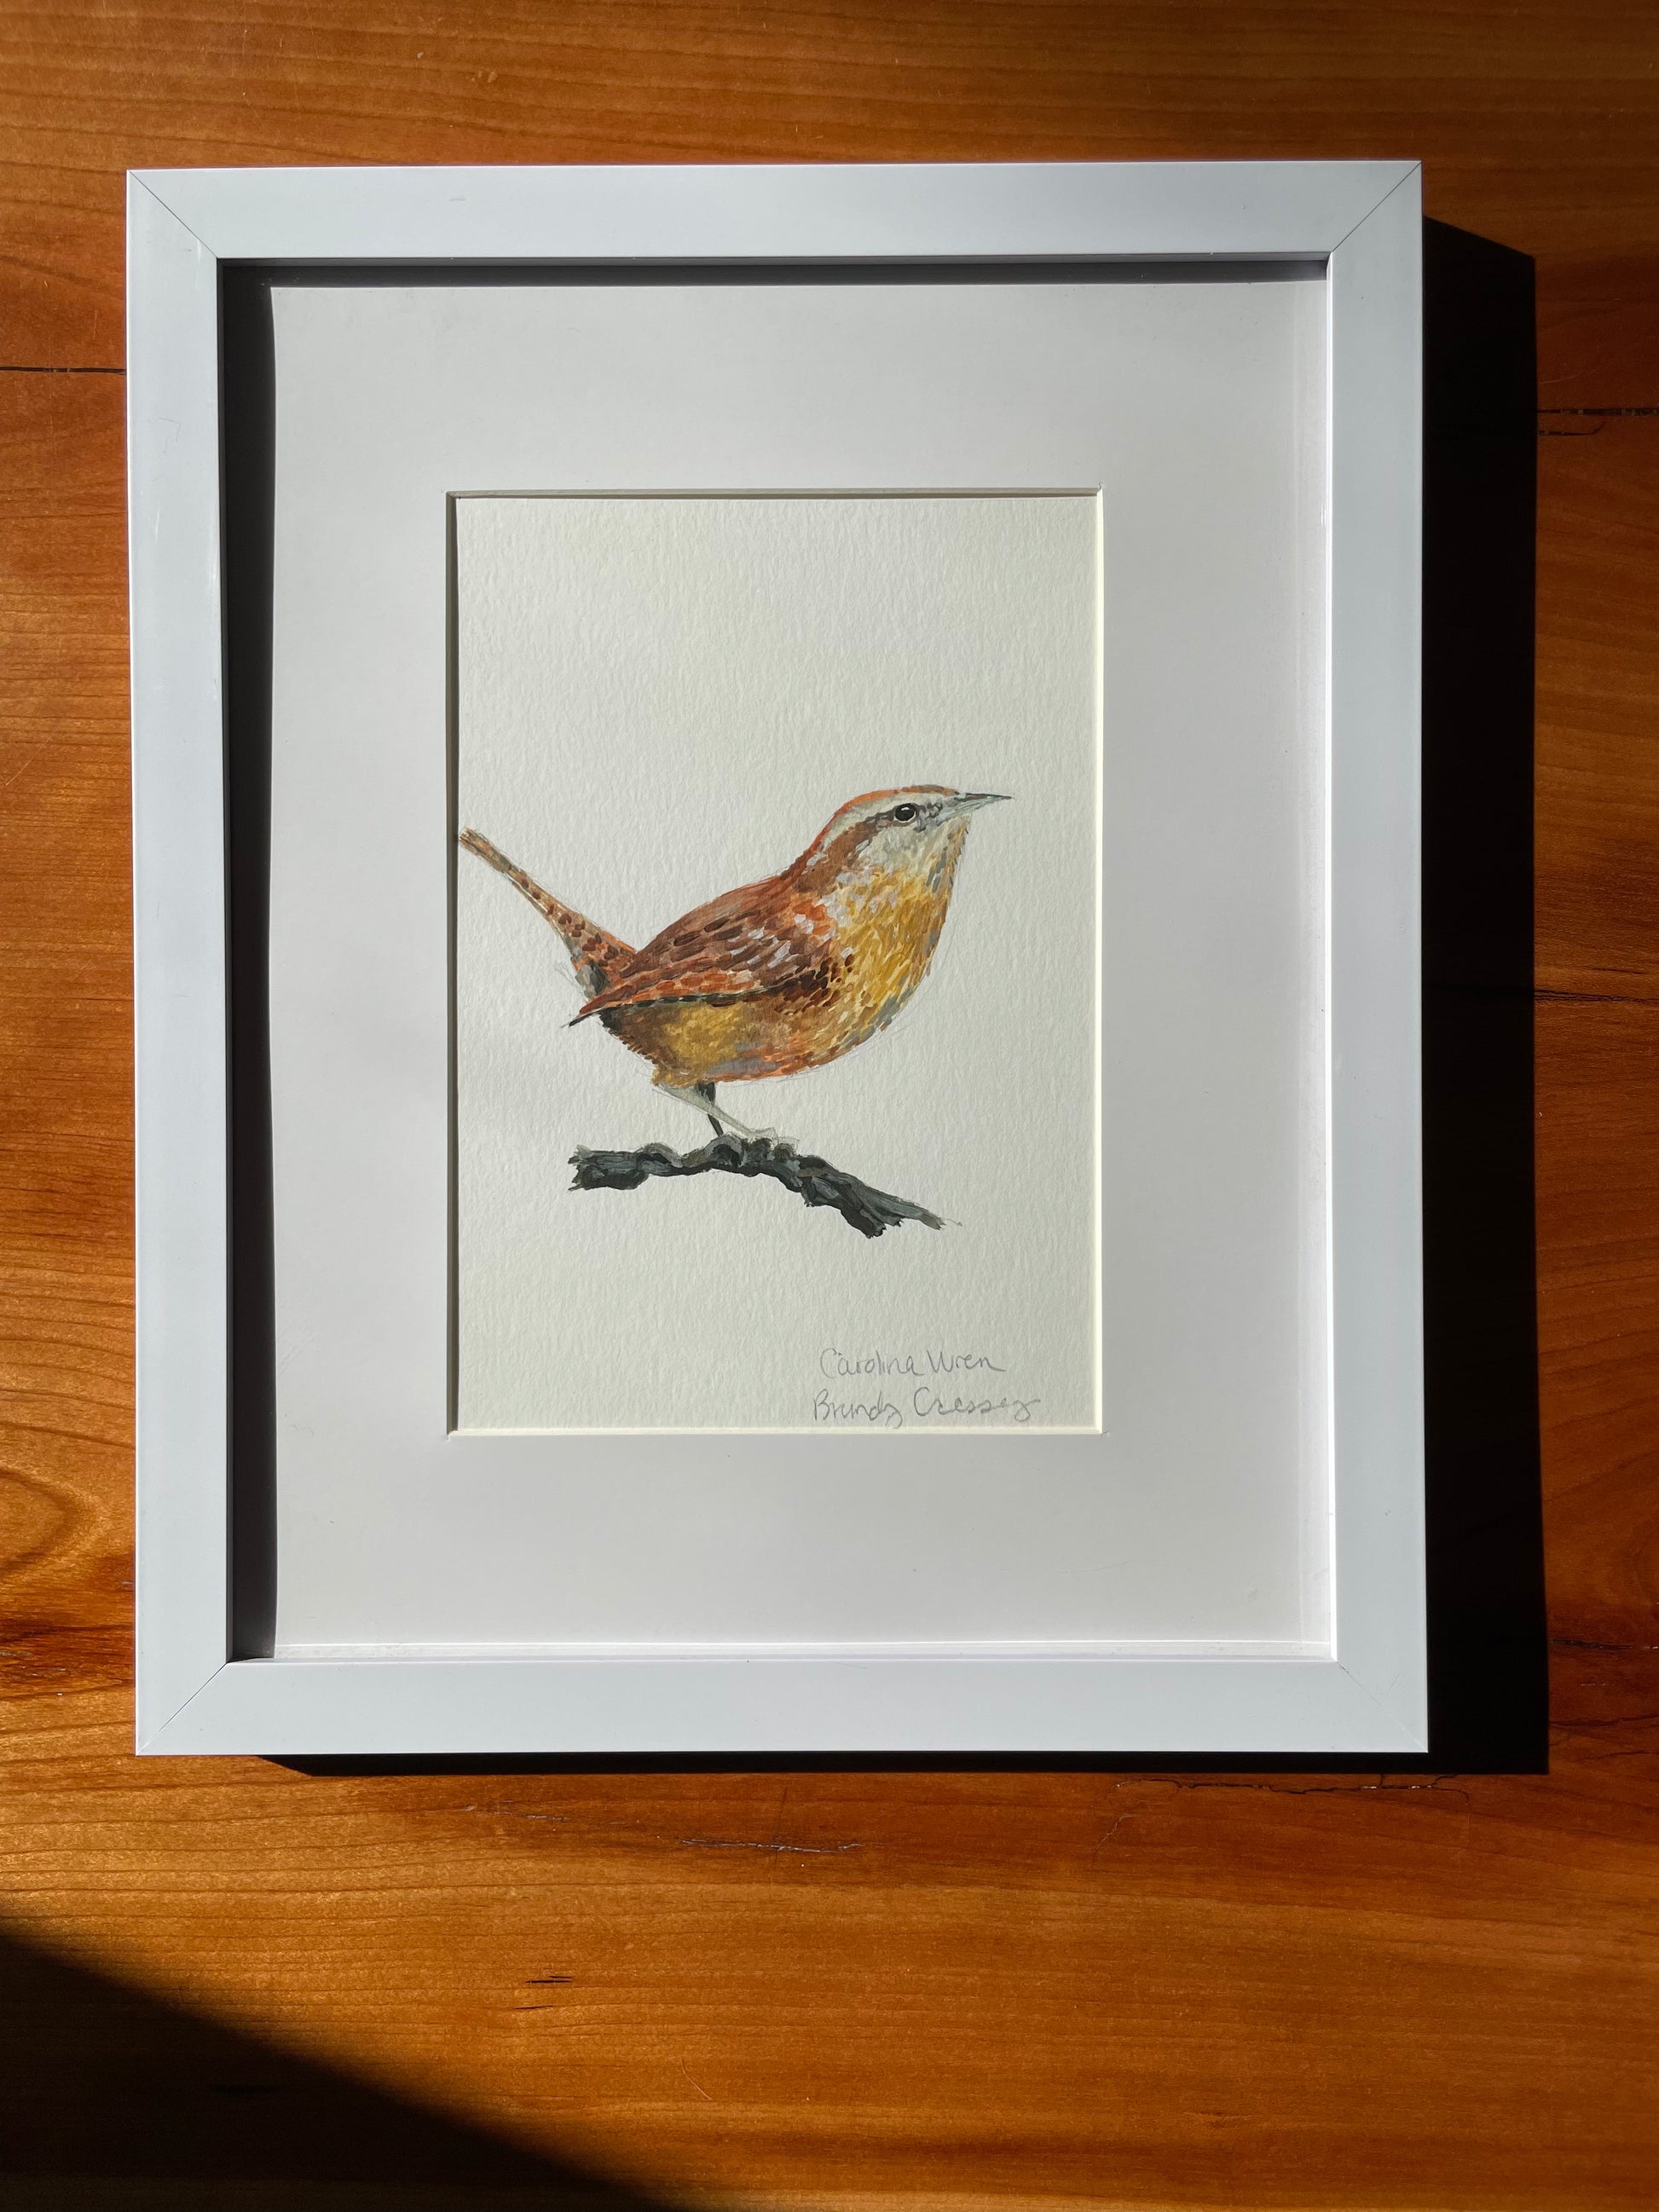 framed acrylic painting of a carolina wren by brandy cressey for florence farmstead in maine.